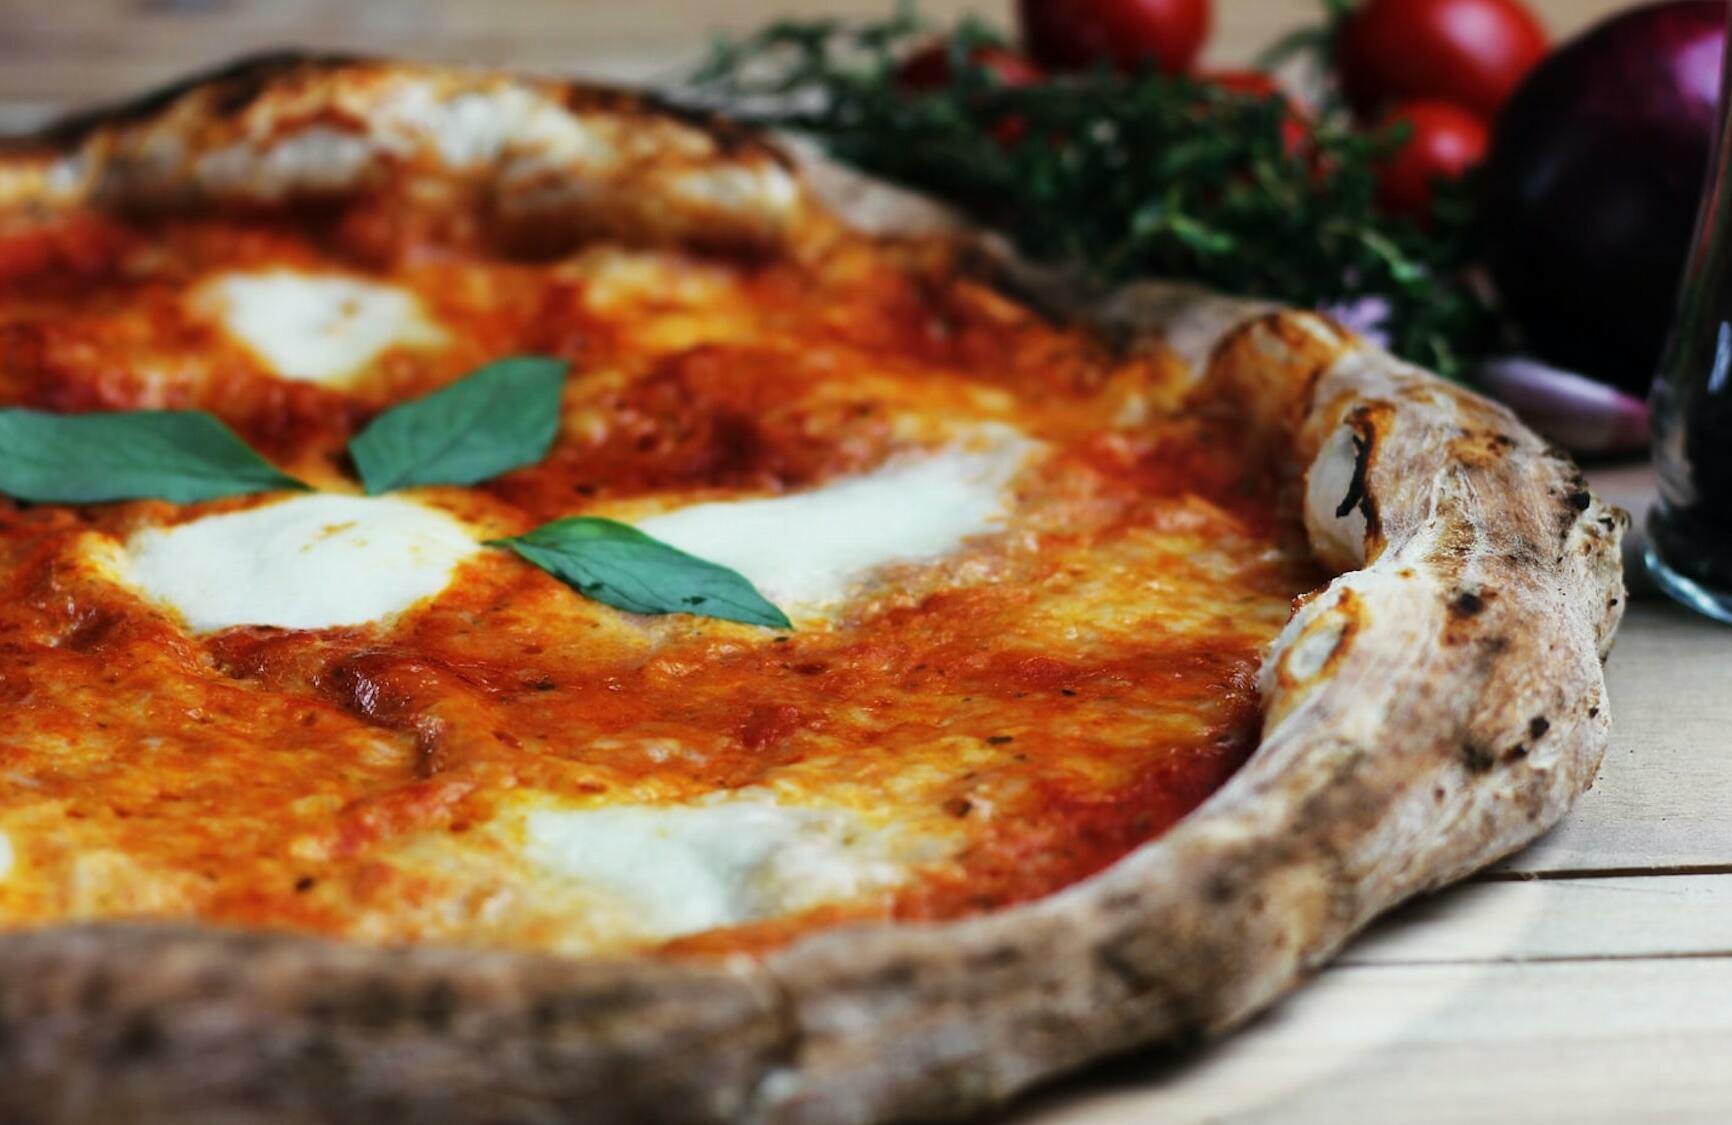 The 20 best pizzas in Paris to devour without further delay